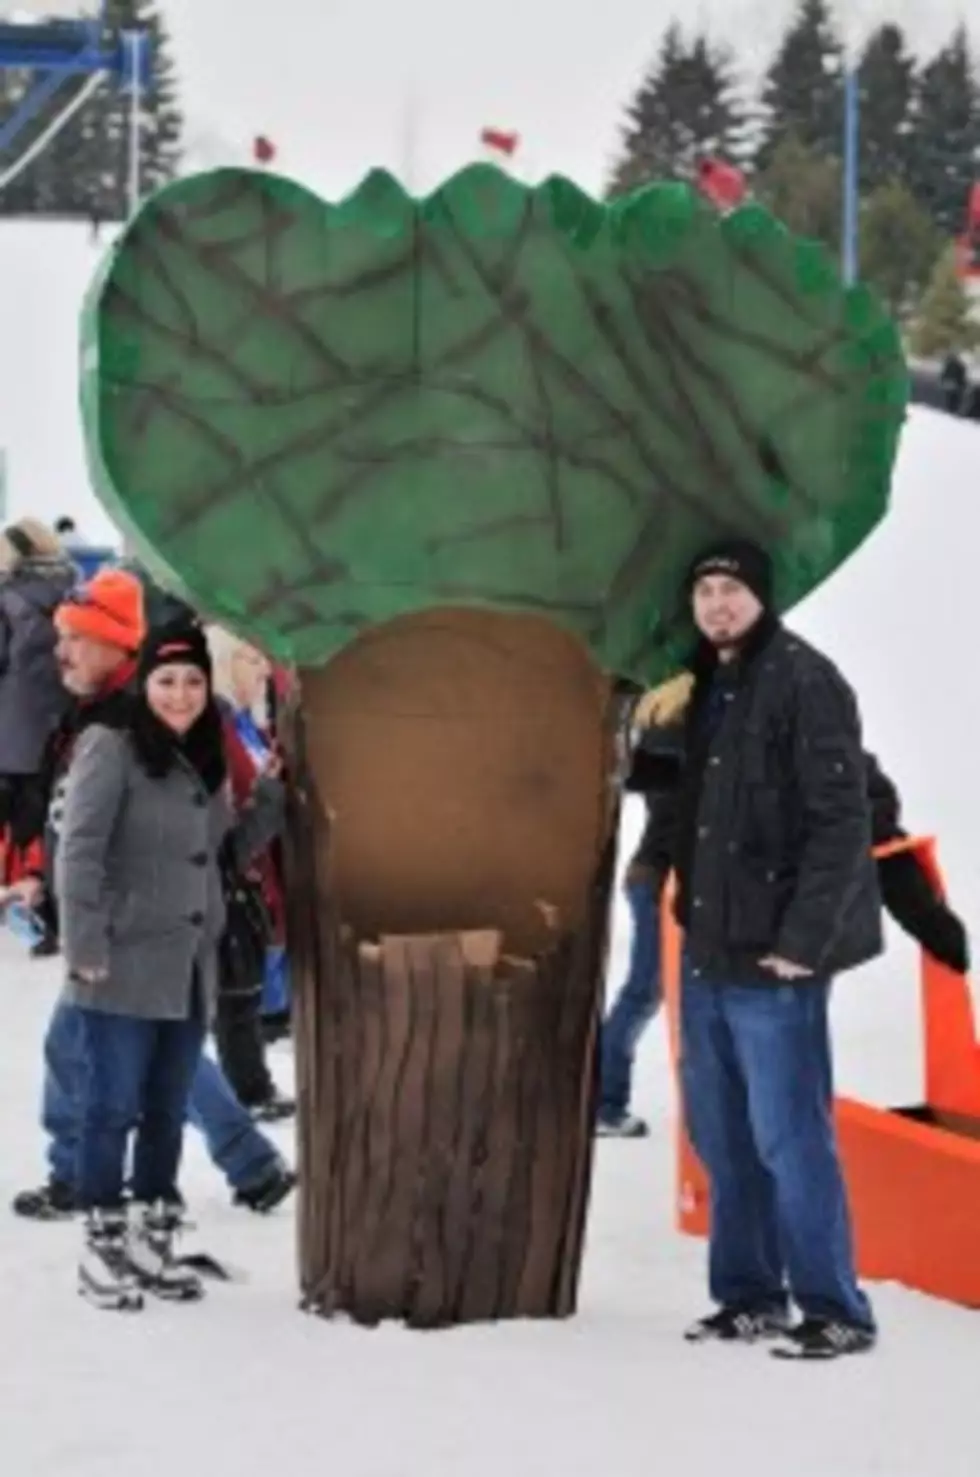 Tree&#8217;s Cardboard Classic Sled Probably Won&#8217;t Look Like a Penis This Year&#8230; Probably [PHOTOS]